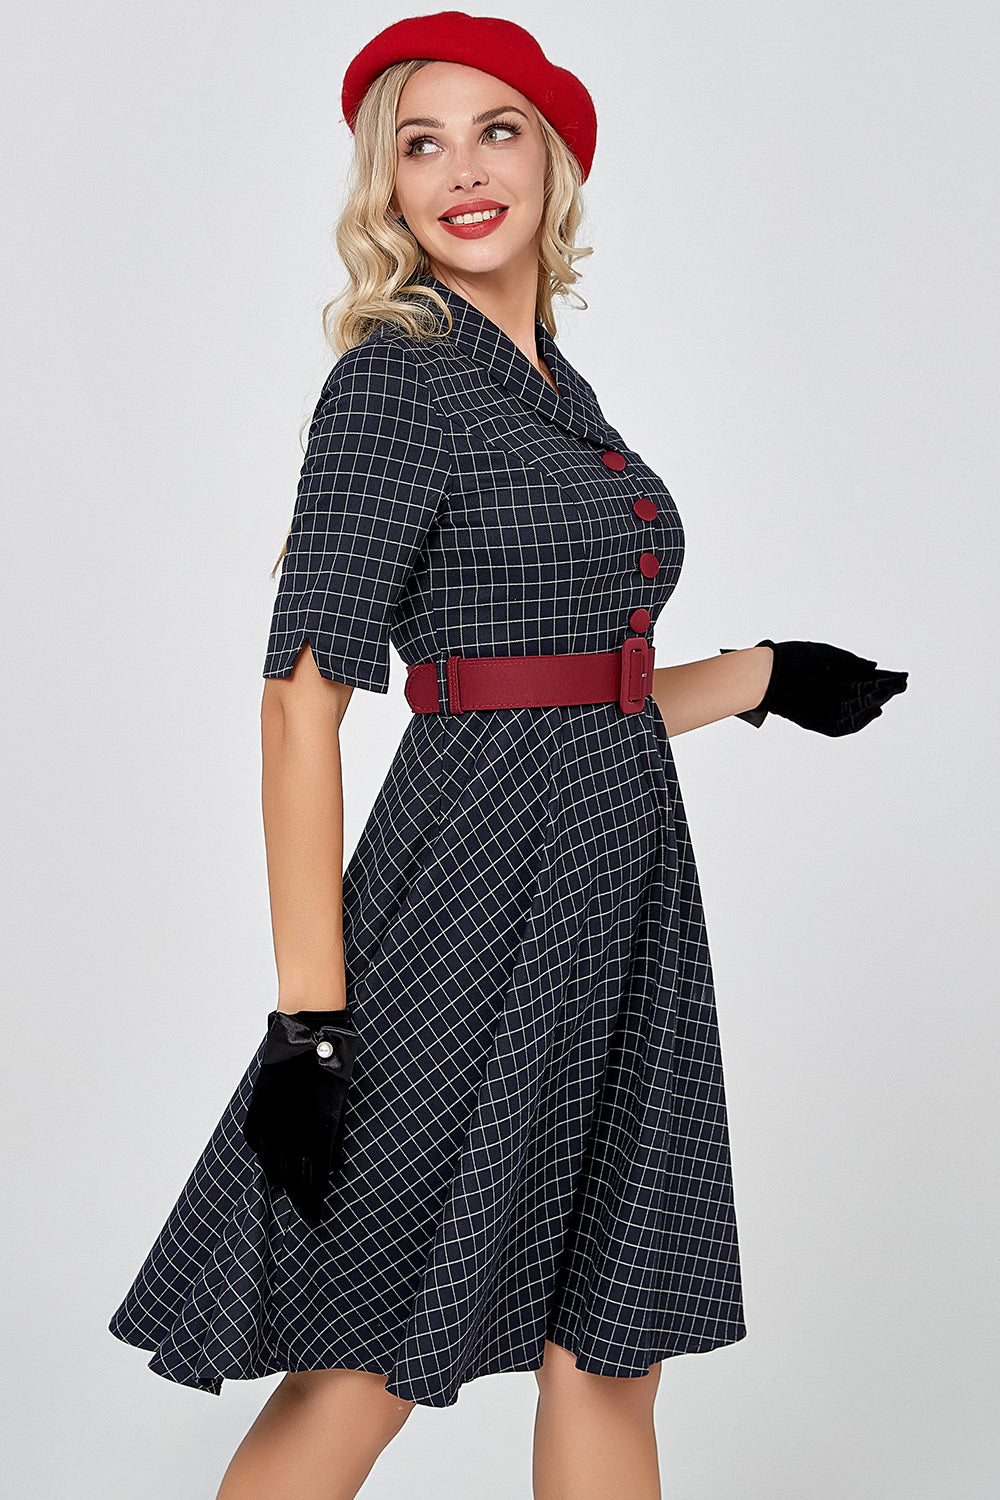 Navy Gingham Vintage 1950s Dress with Sleeves